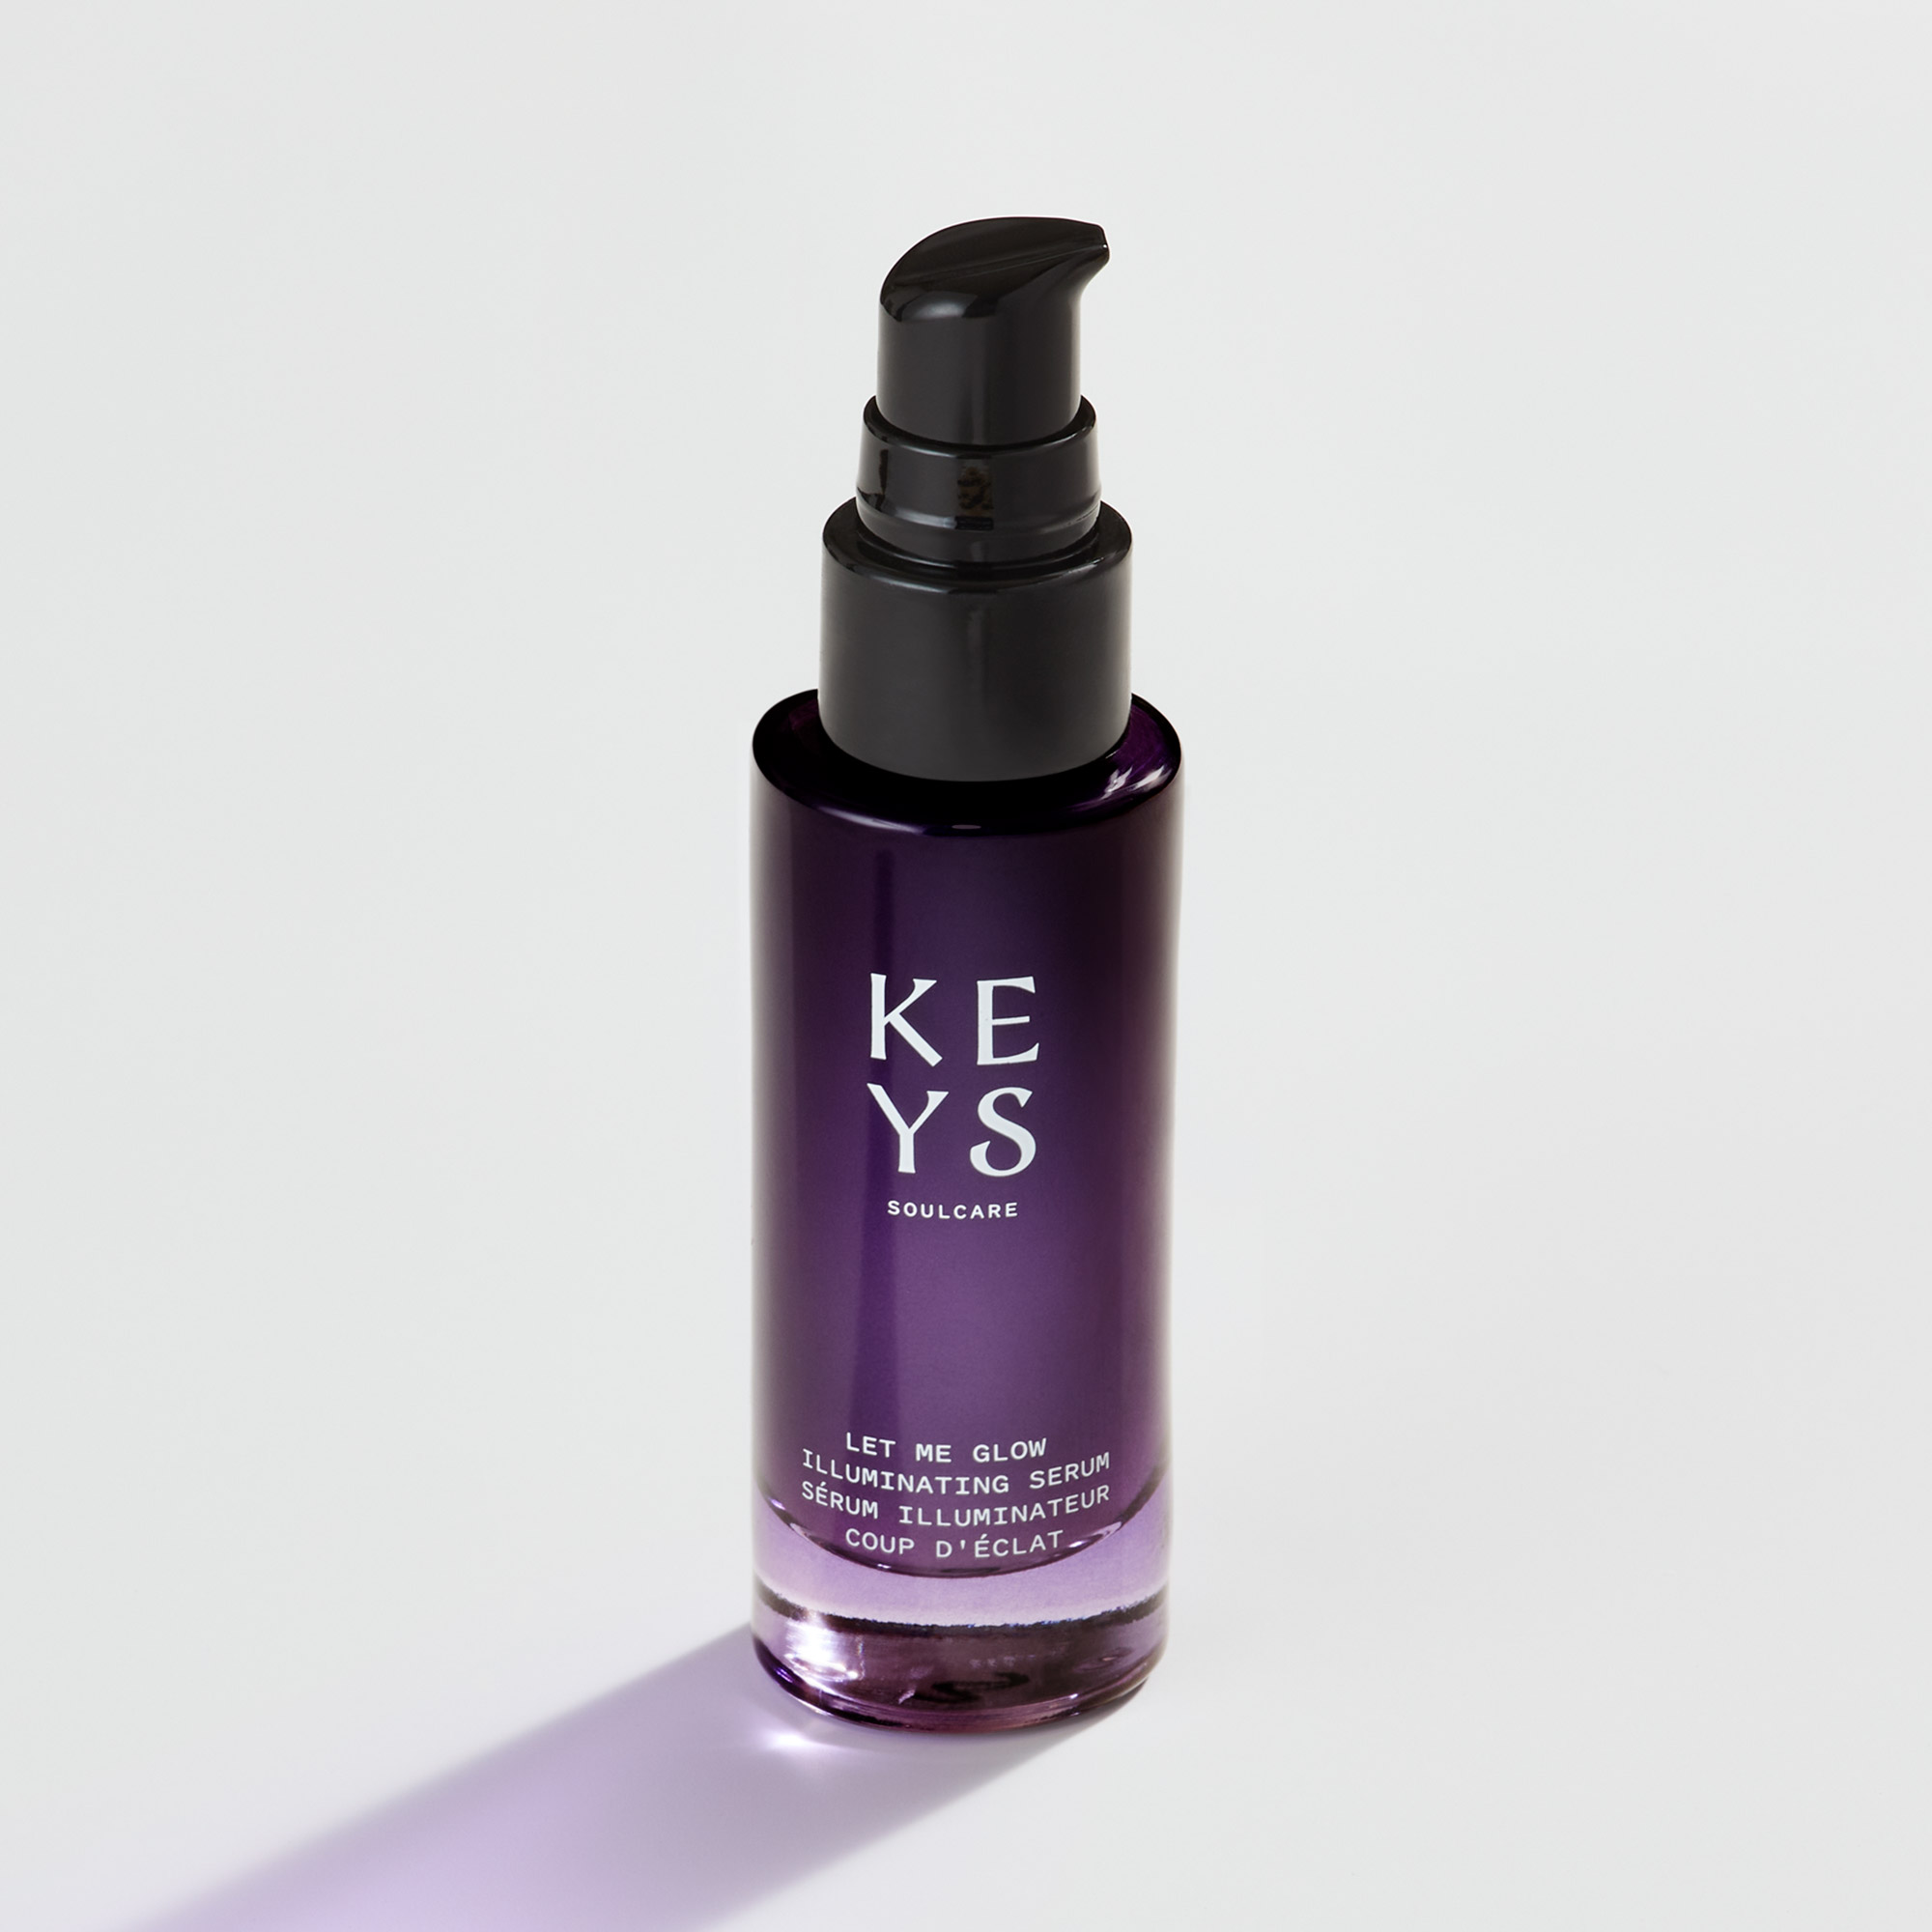 A keys soulcare Let Me Glow Illuminating Priming Serum with Niacinamide